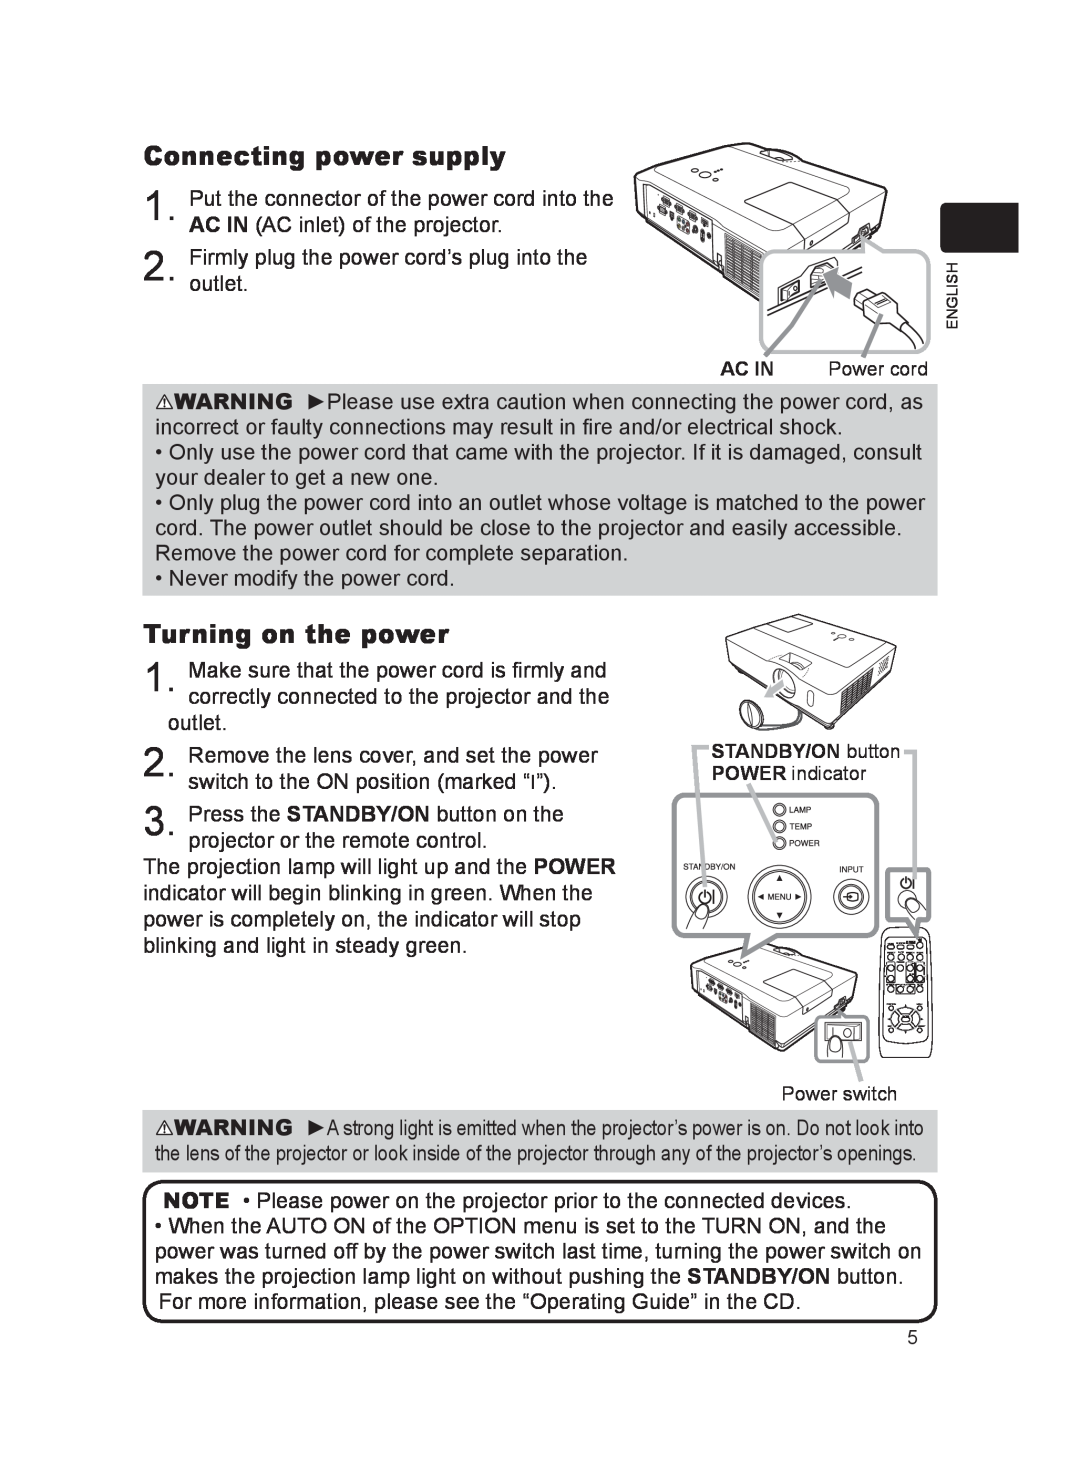 Dukane 8917H user manual Connecting power supply, Turning on the power 